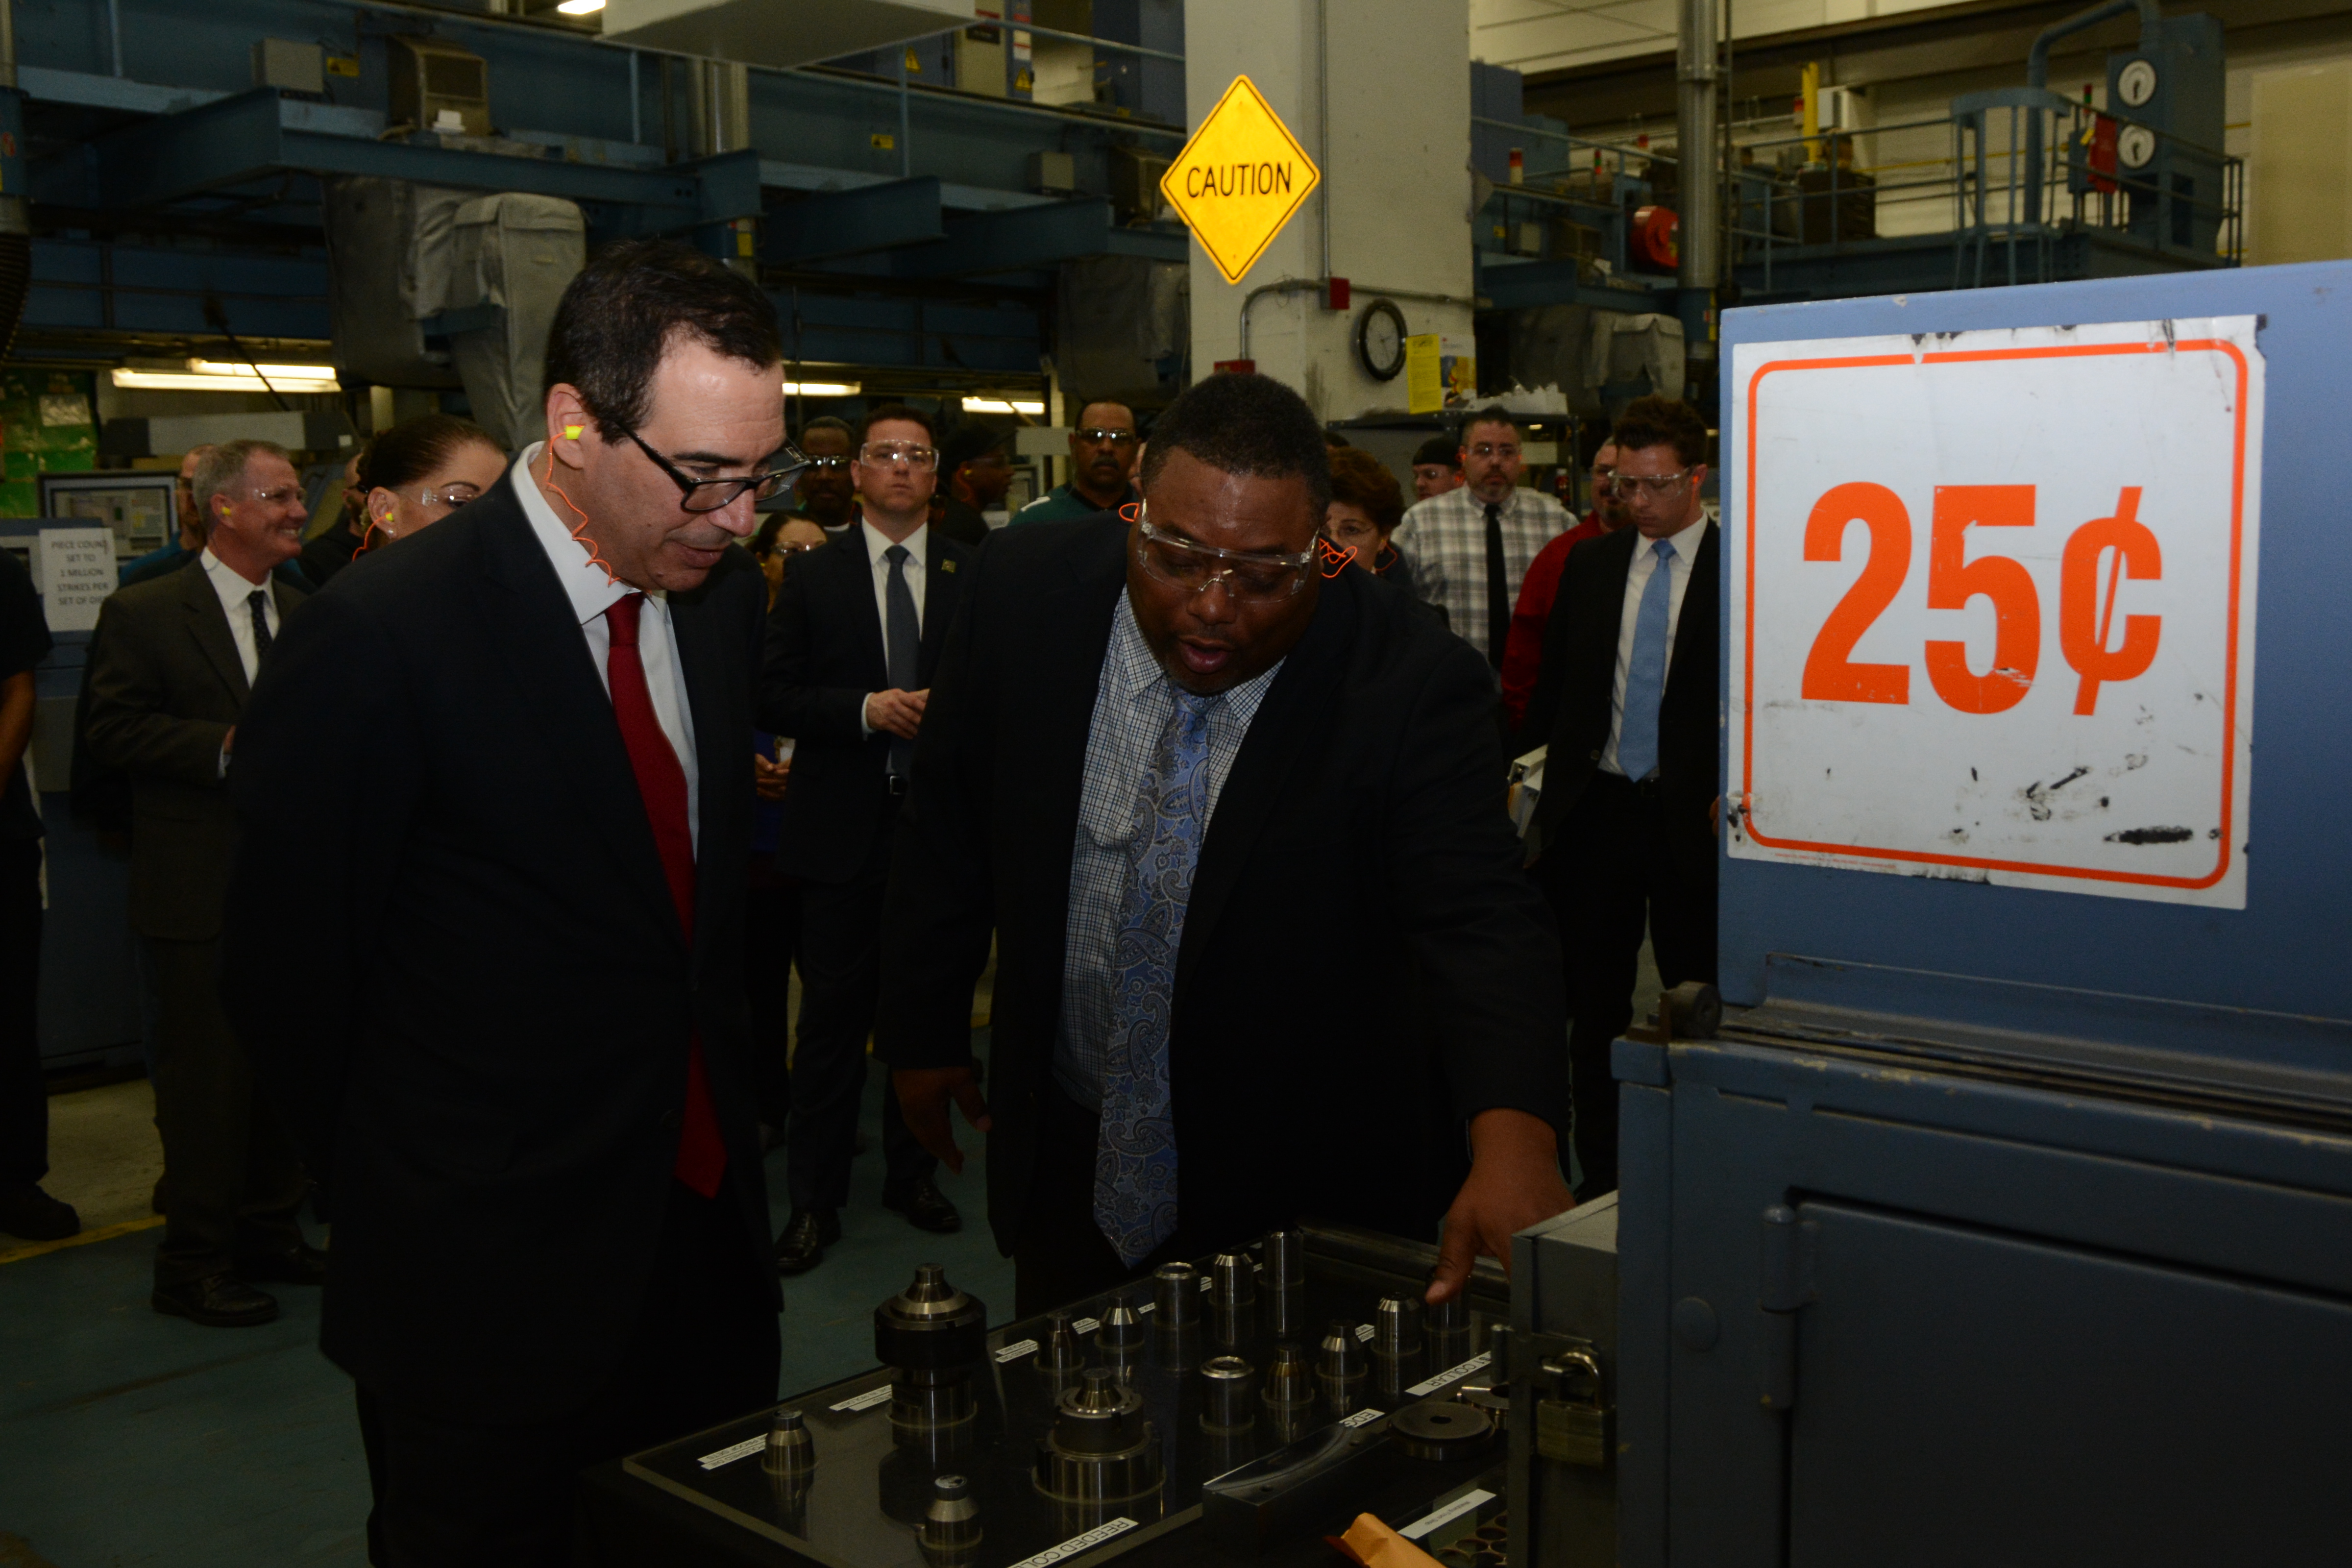 U.S. Mint Coining Division Chief (Philadelphia facility) Norm Patterson discusses hubs and dies with Treasury Secretary Steven Mnuchin on a tour of the circulating production area at the U.S. Mint facility in Philadelphia on February 22, 2018. U.S. Mint p